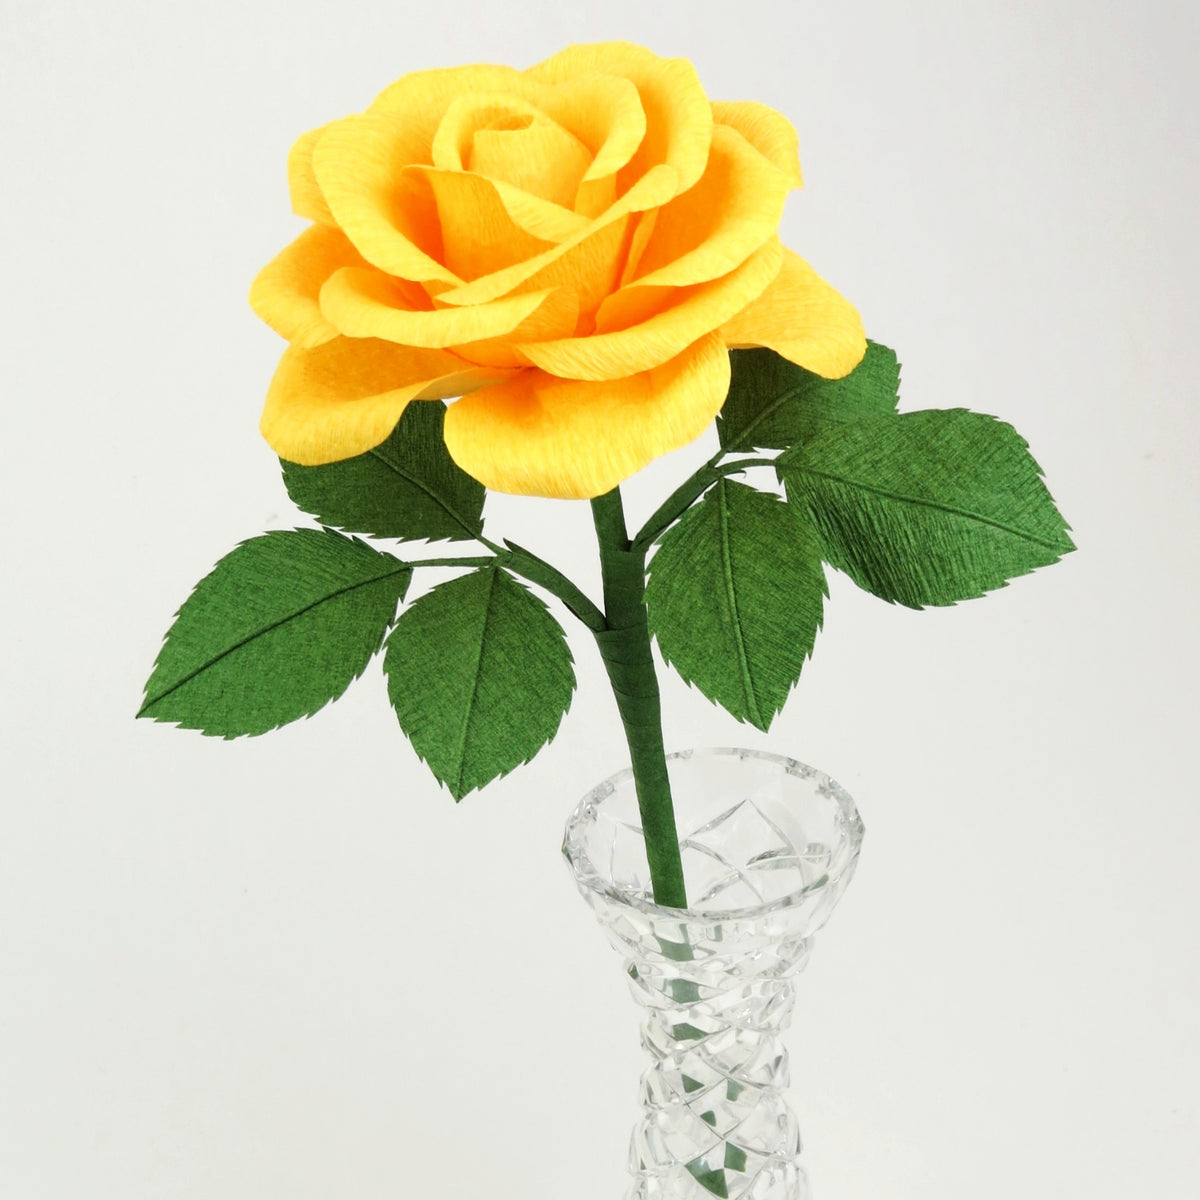 Yellow paper rose with six leaves standing in a narrow glass vase against a light grey background